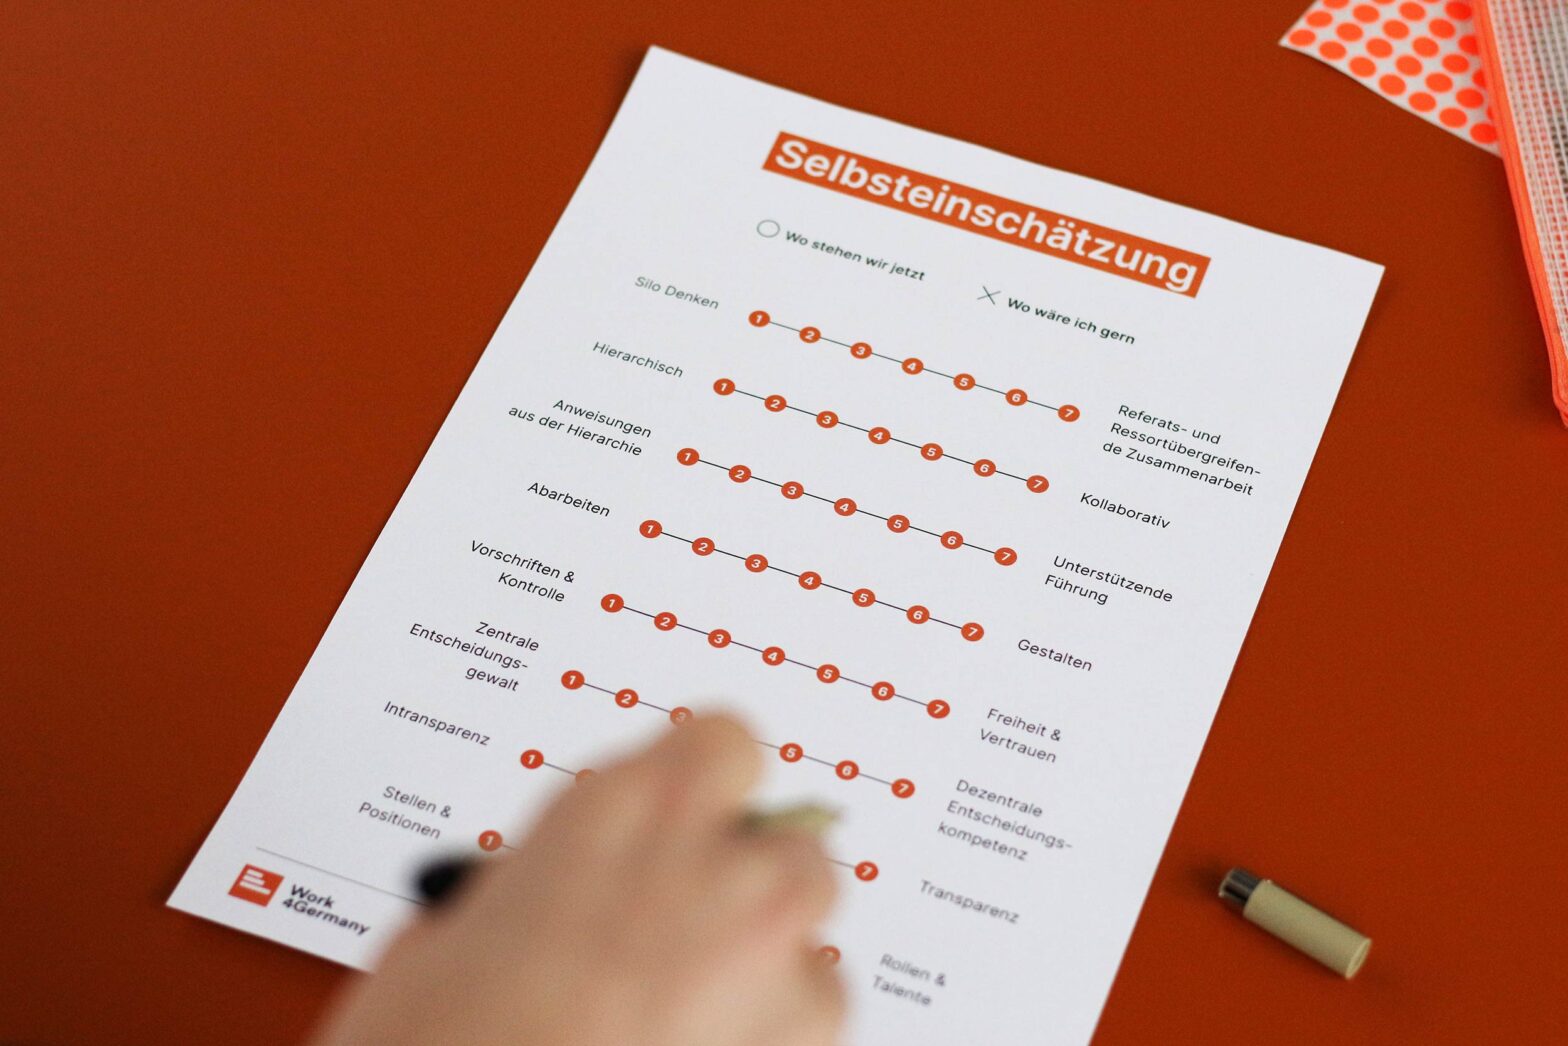 A sheet on an orange table that a person starts to describe - it is titled 'Self-assessment' and shows 8 different scales with 8 steps each among them